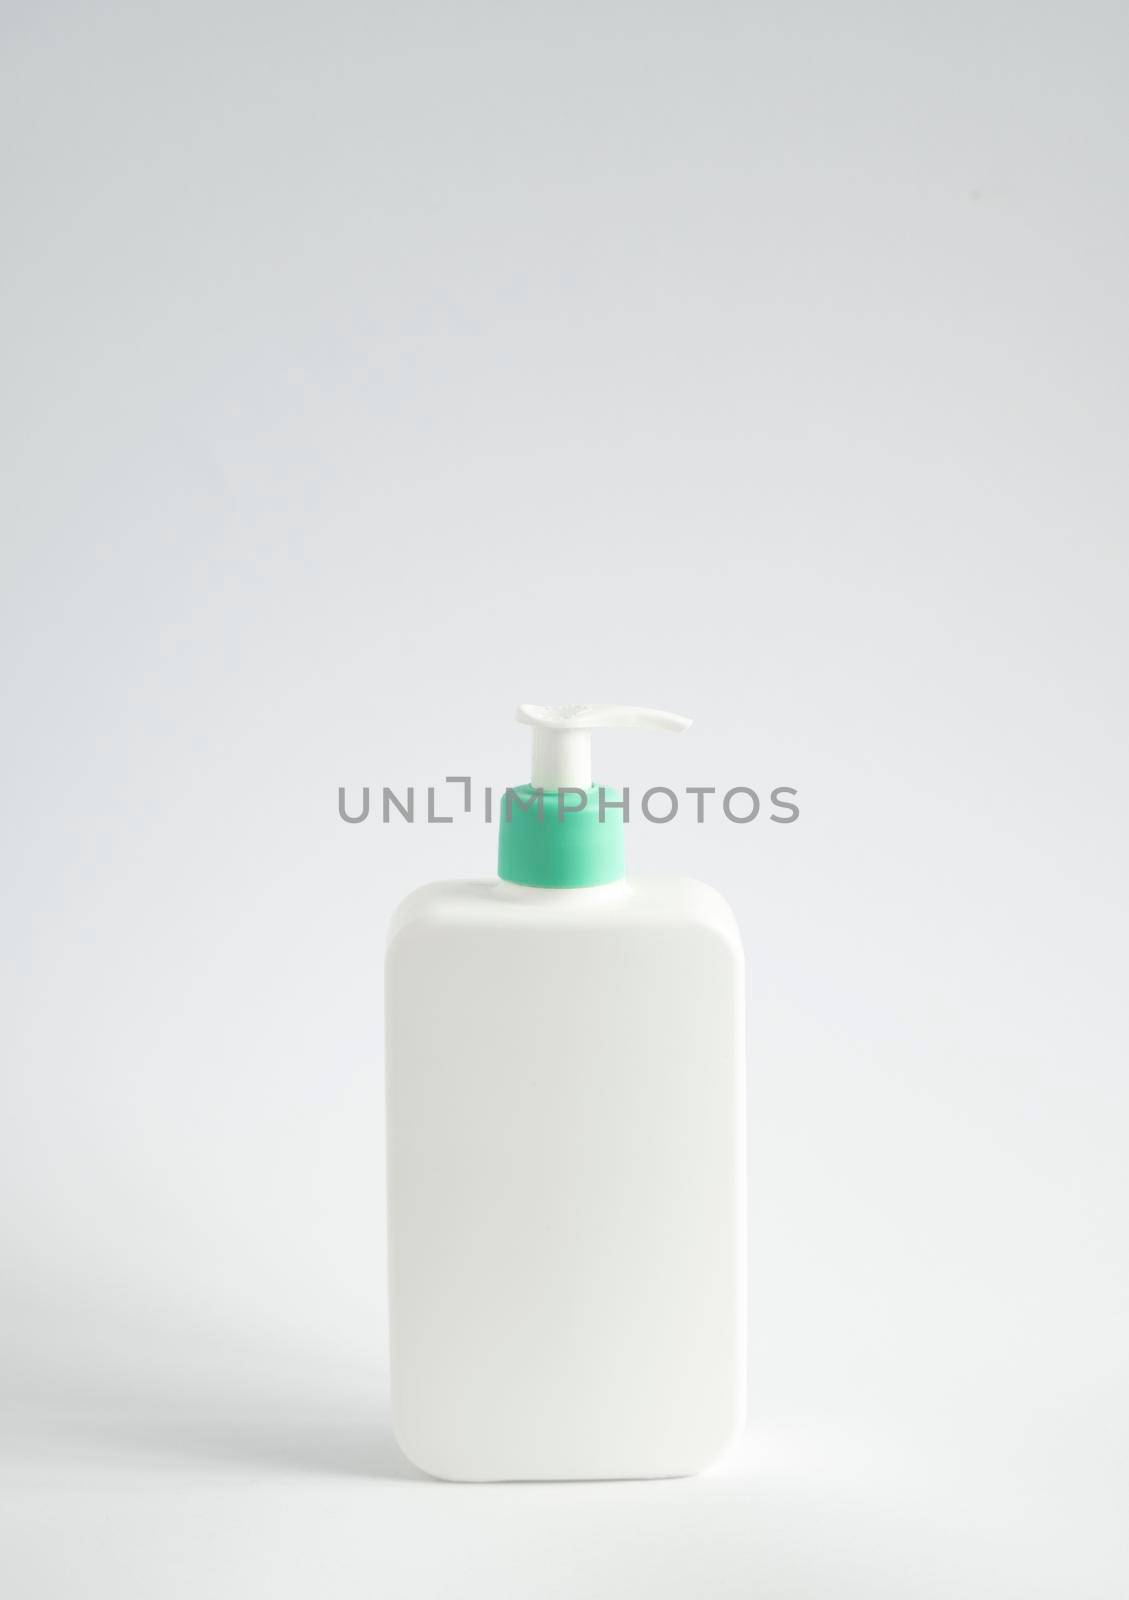 Liquid container for gel, lotion, cream, shampoo, bath foam. Cosmetic plastic bottle with green dispenser pump on white background. Cosmetic packaging mockup with copy space